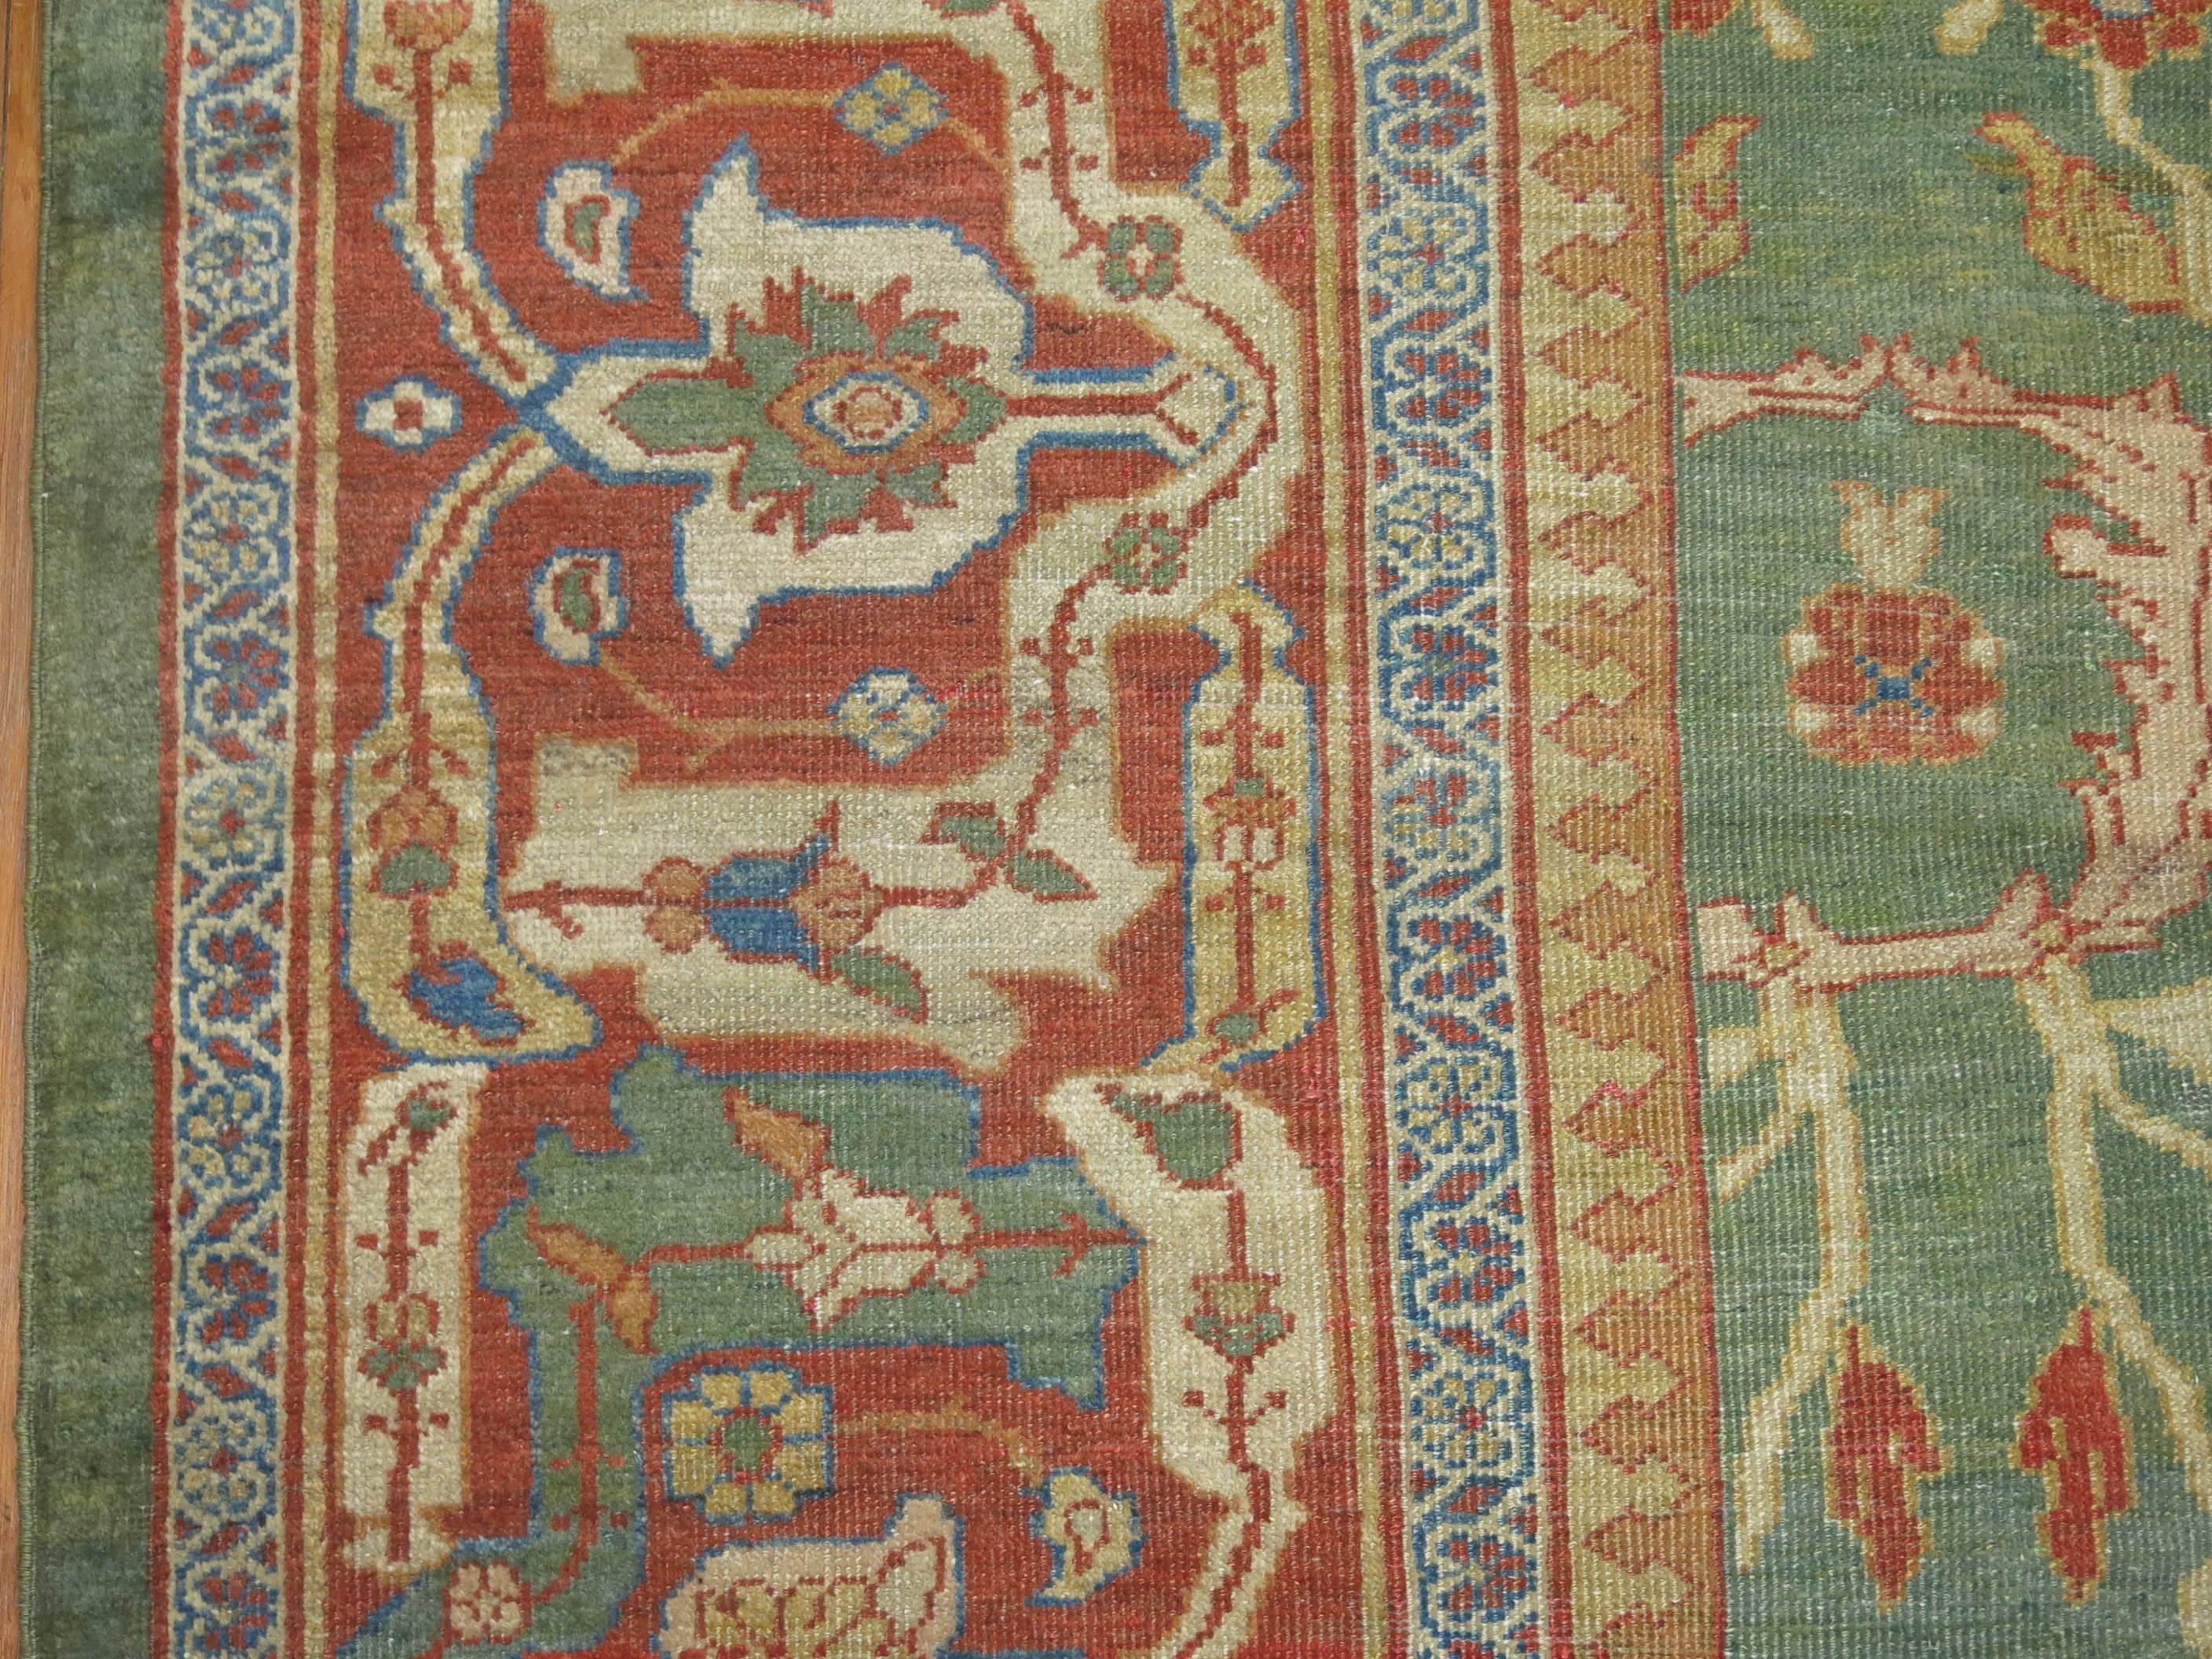 Exquisite Persian Sultanabad rug with a green ground and red border.

Often the finest in the Sultanabad antique carpet style render spacious, very unique variations upon classical Persian all-over patterns, glowing pastels and earth tones. Most